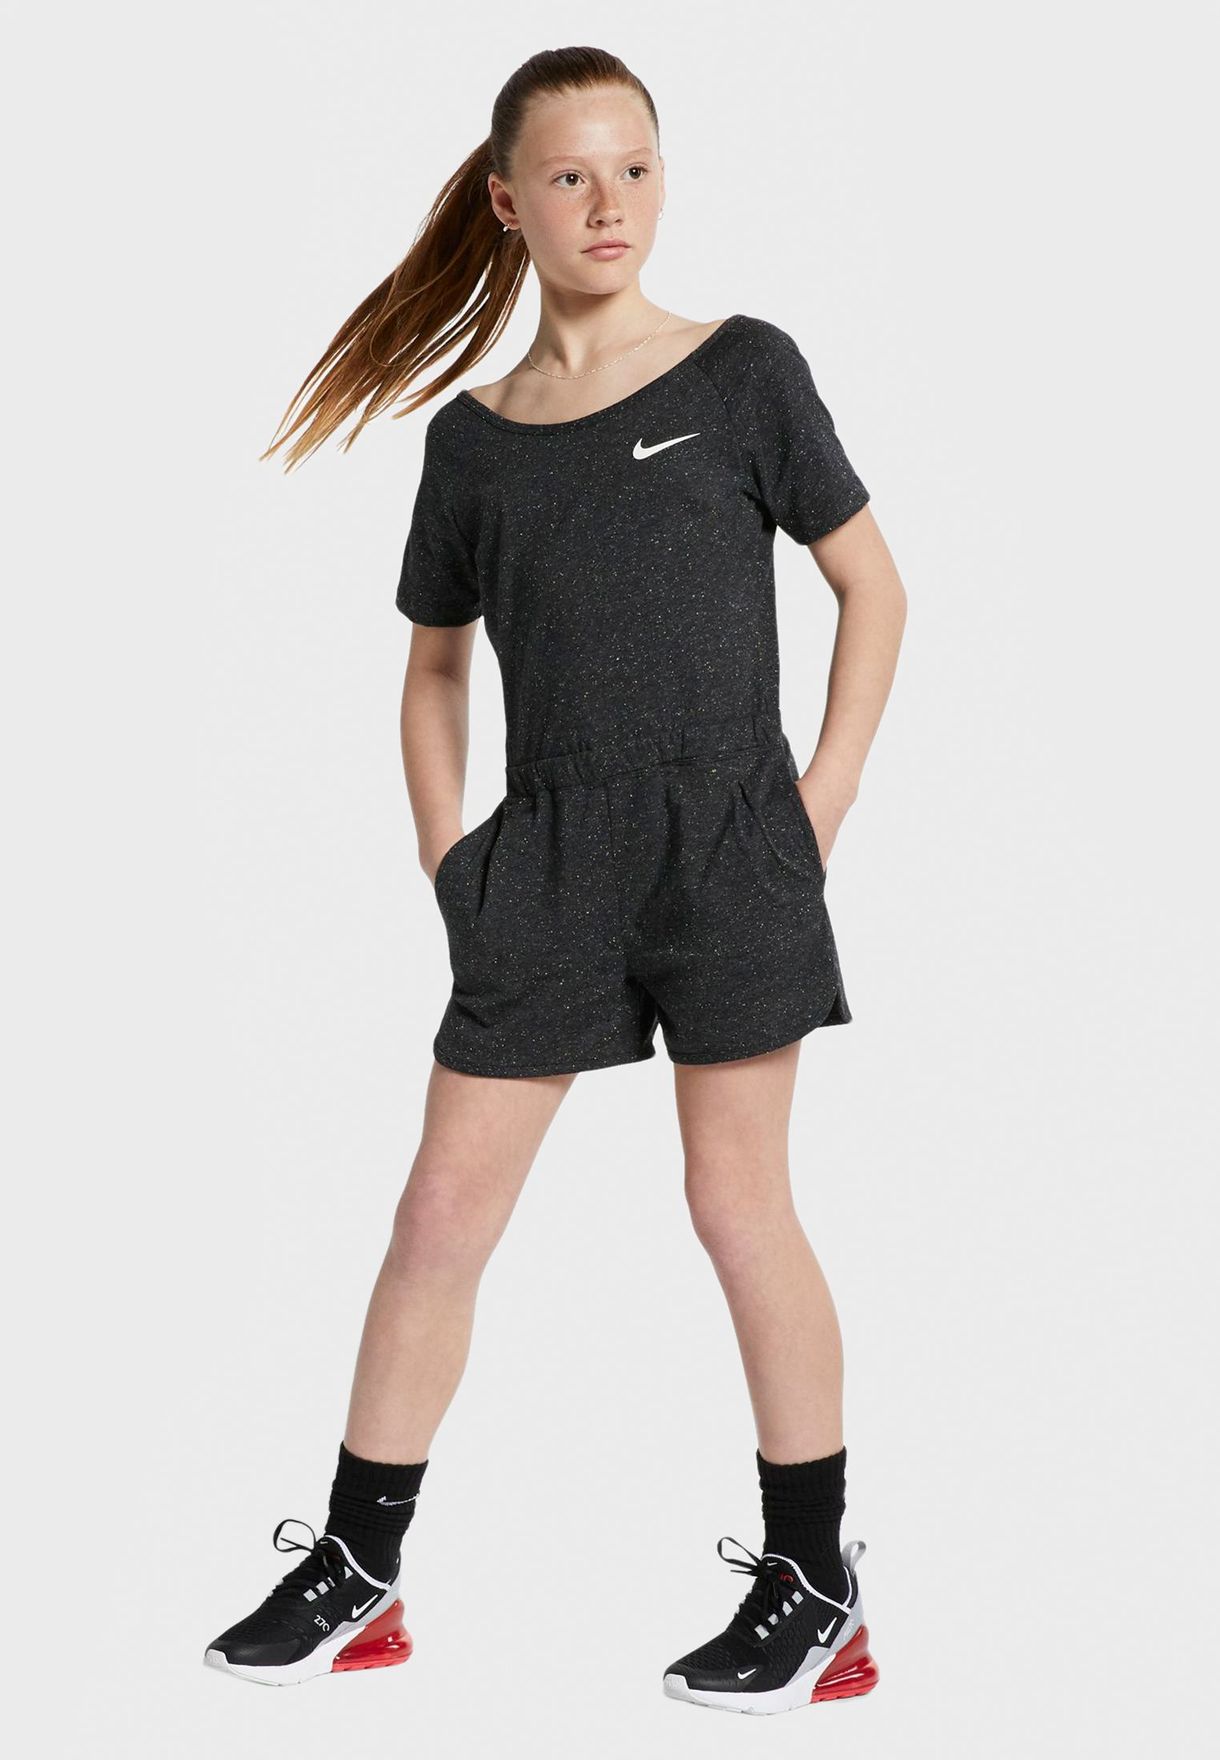 youth nike jumpsuit